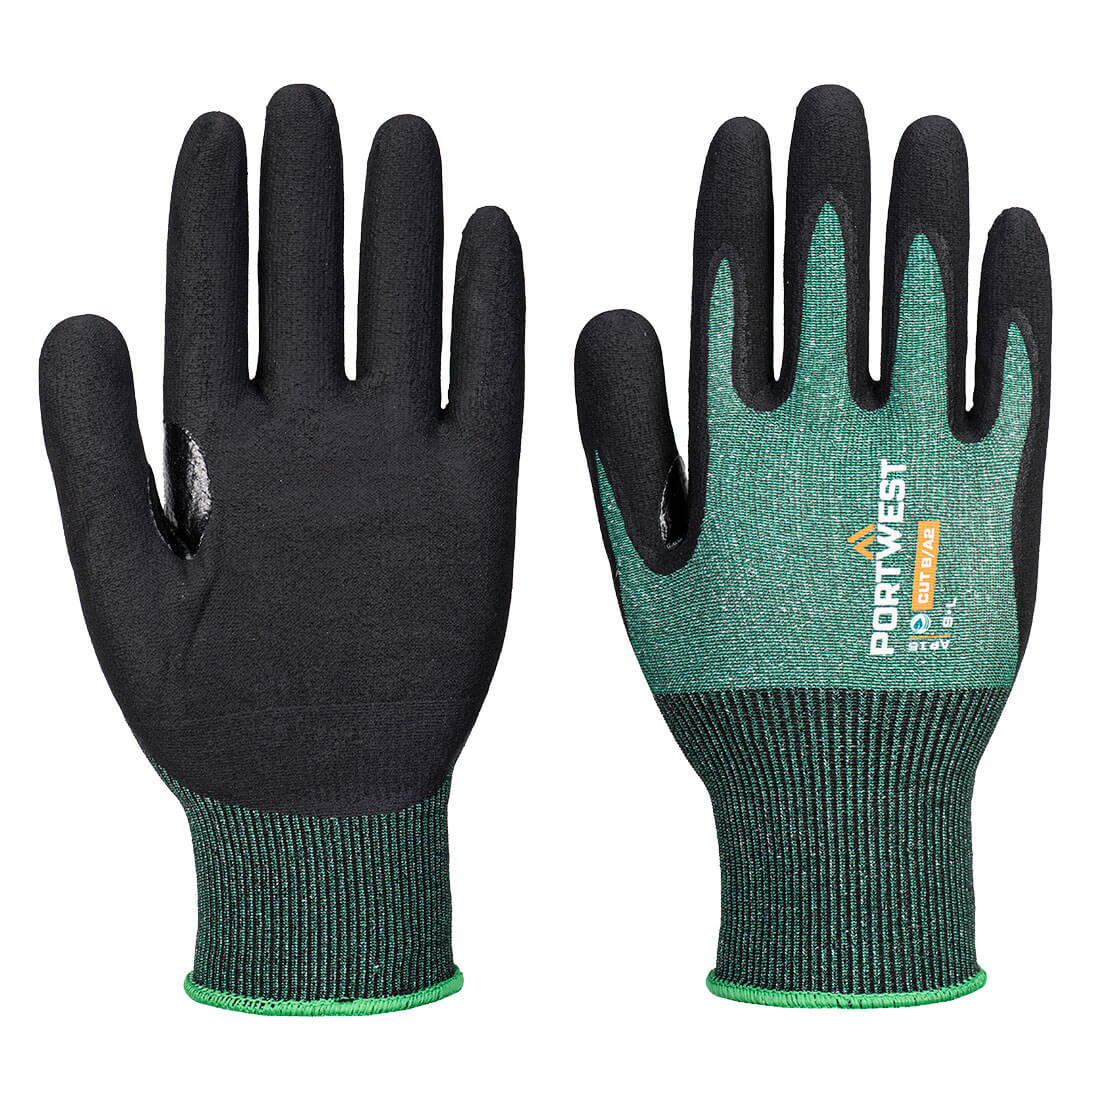 HAND PROTECTION, Grip Performance